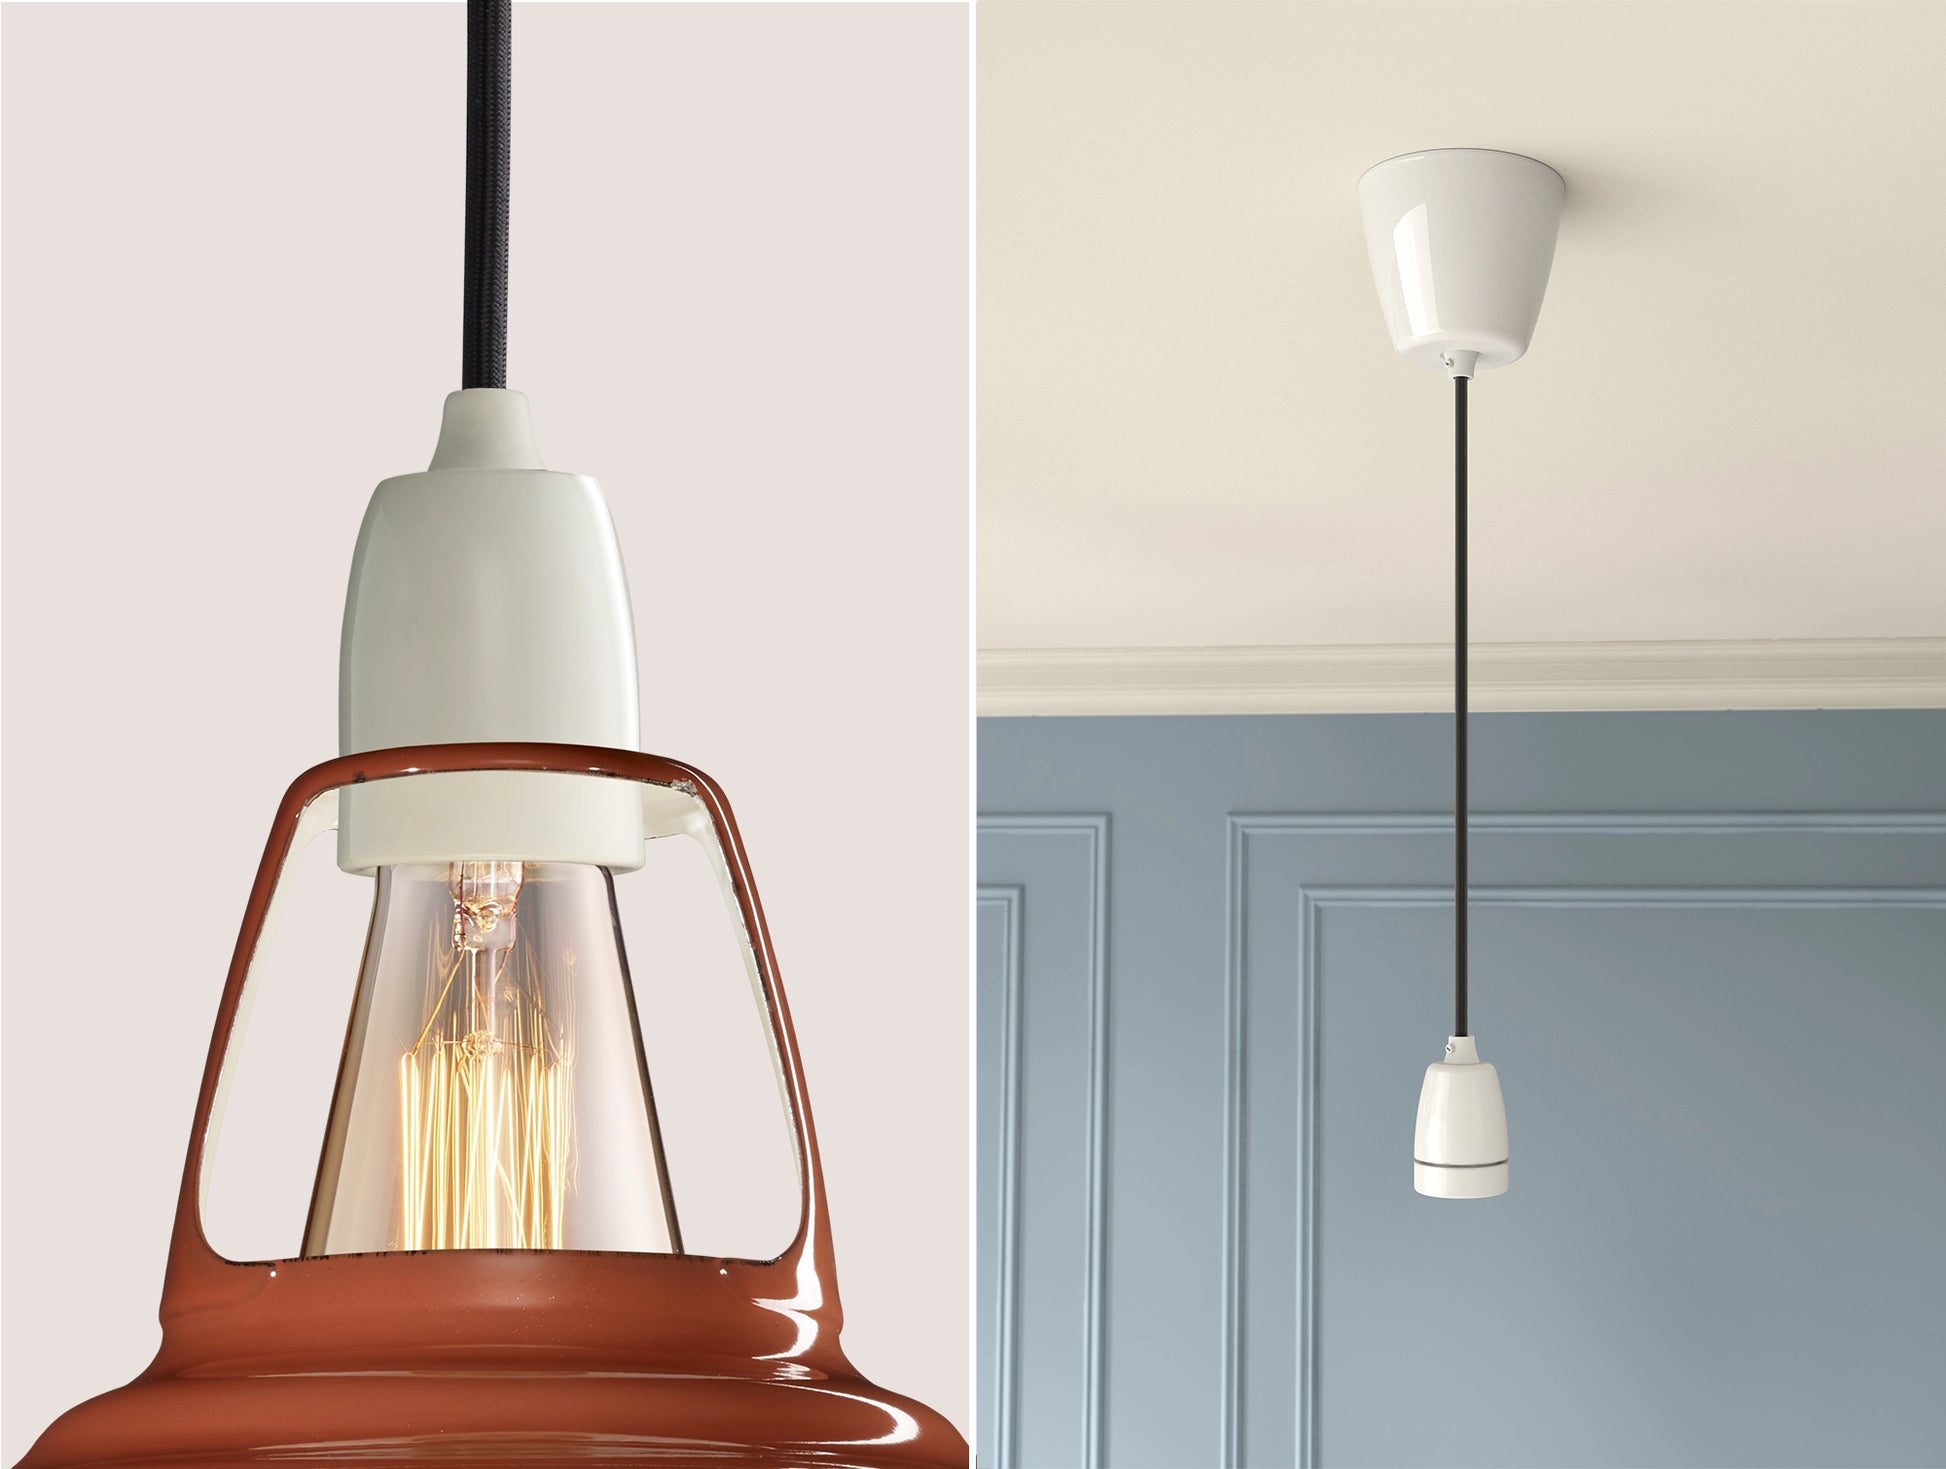 Close up of an E27 Porcelain suspension set on a Terracotta lampshade on the left. On the right, an E27 Porcelain pendant set is hanging from the ceiling